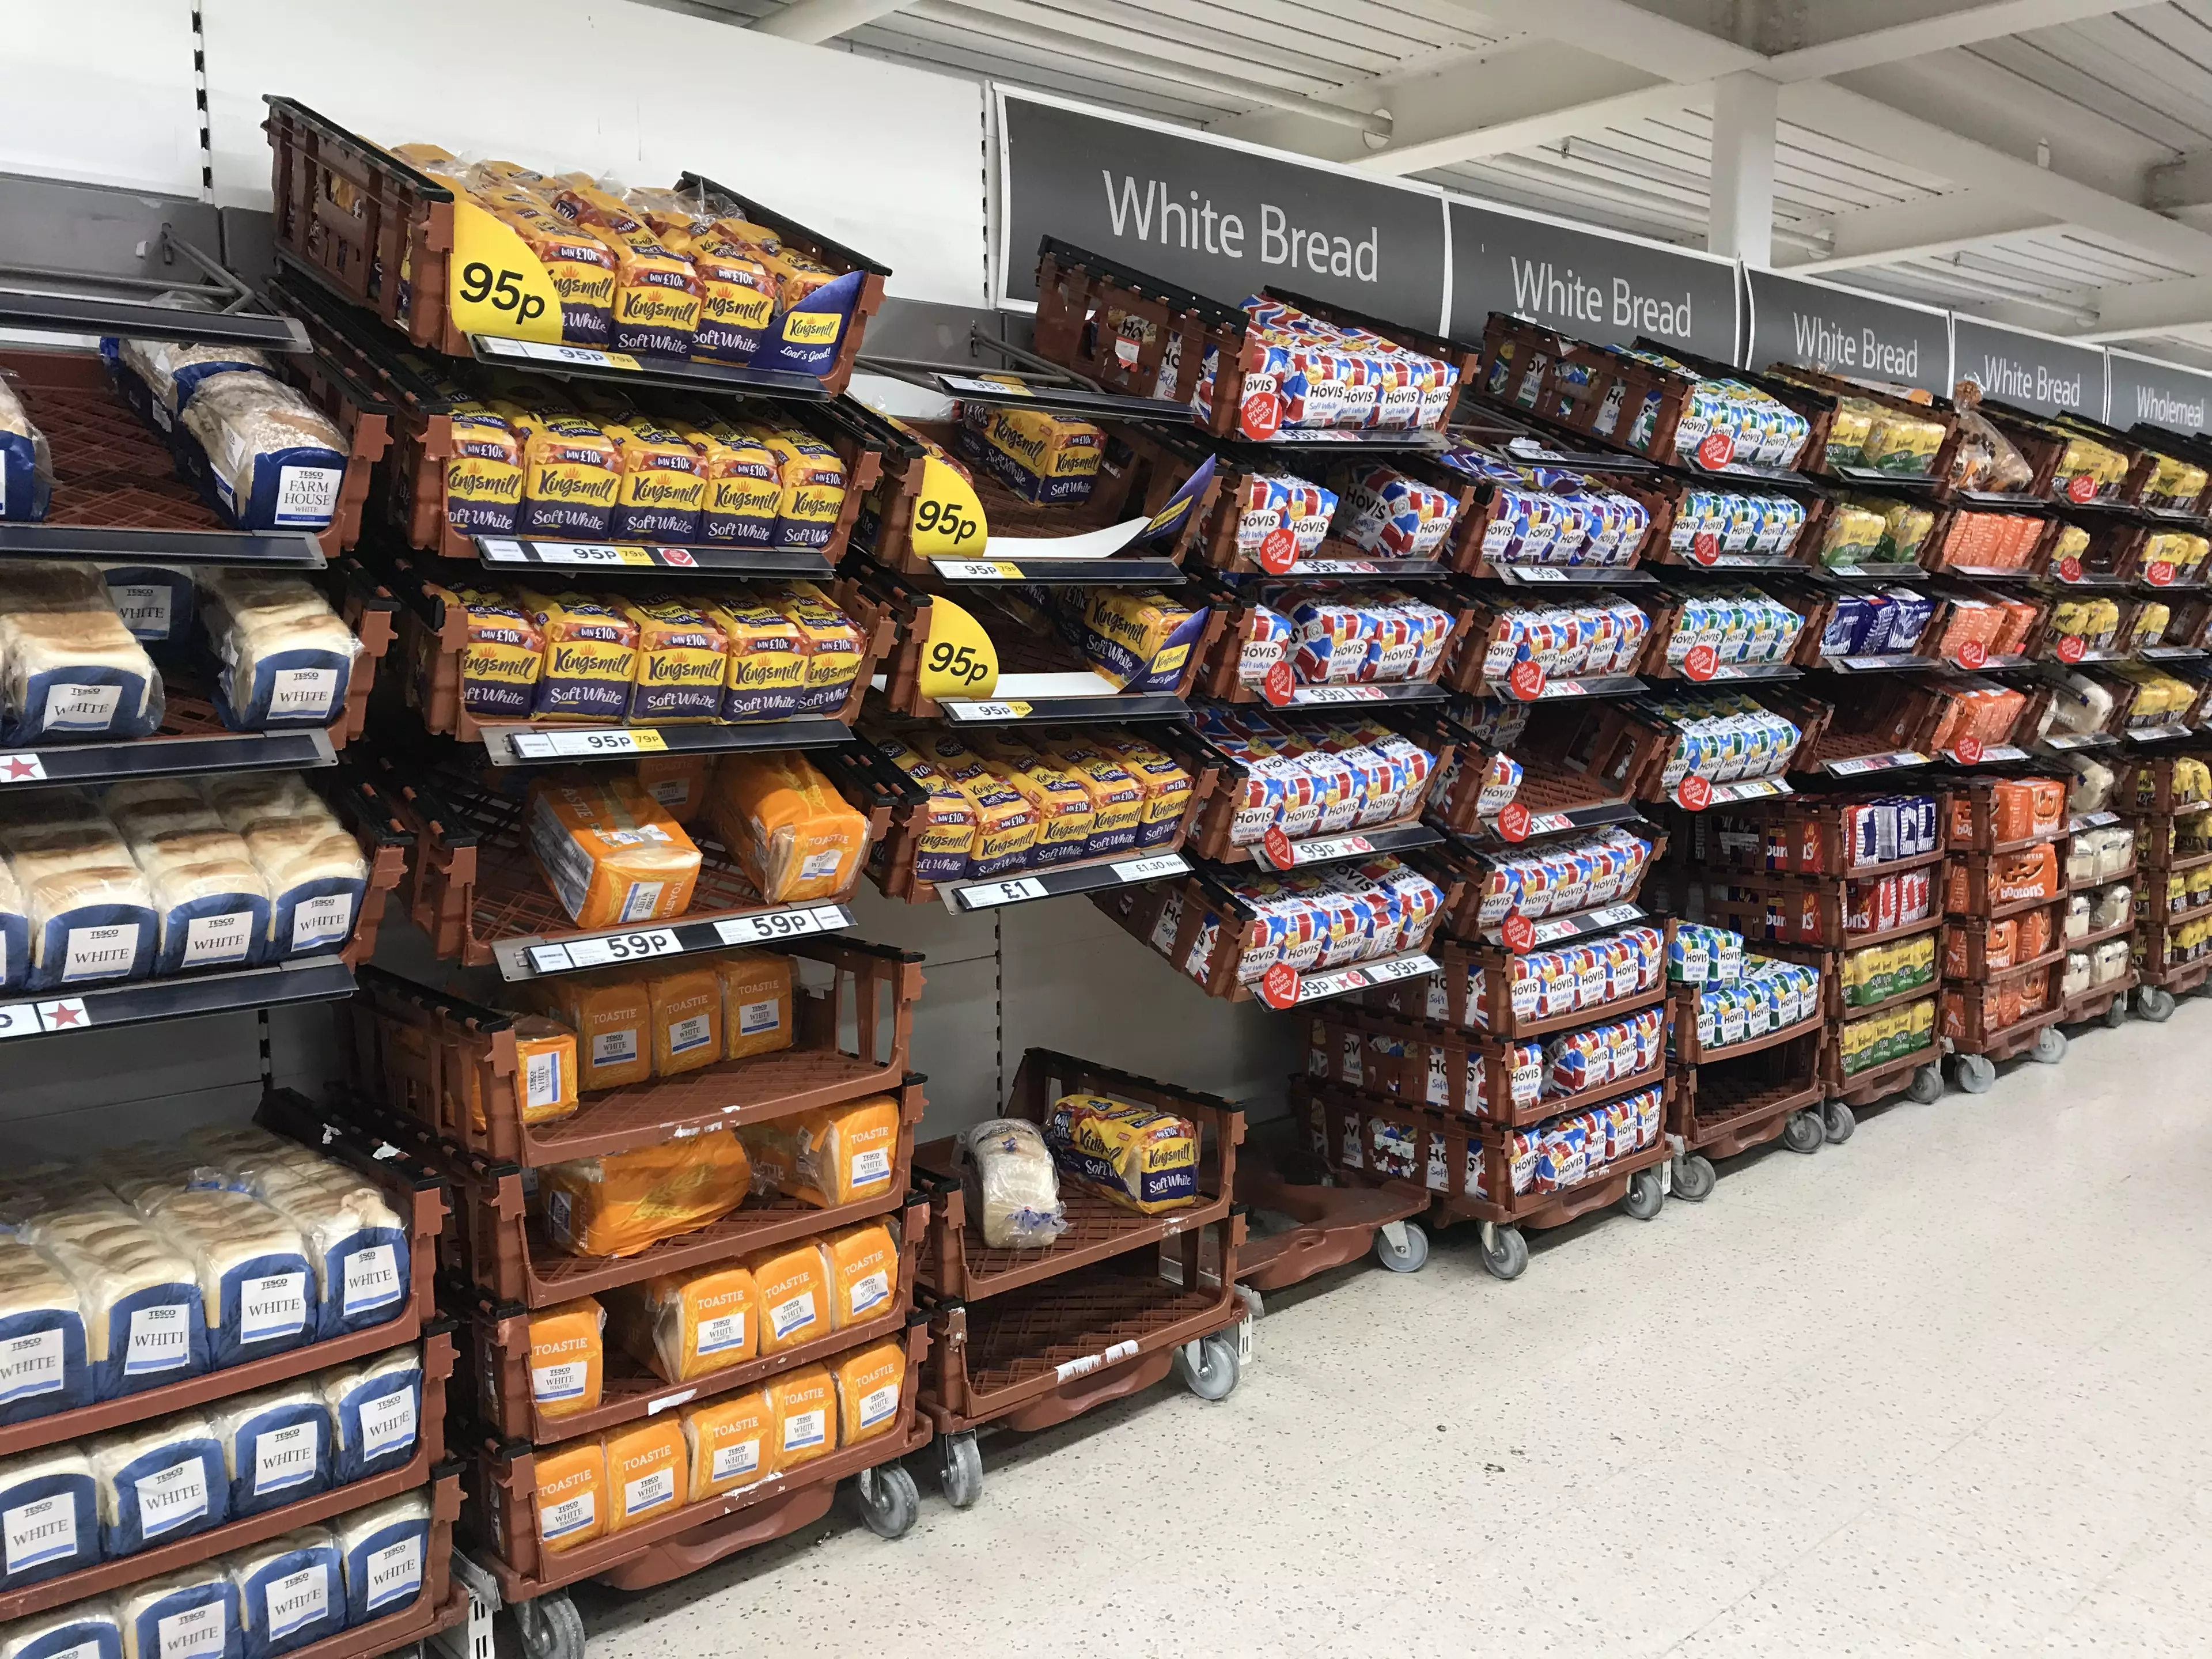 A view of the bread aisle in Tesco.